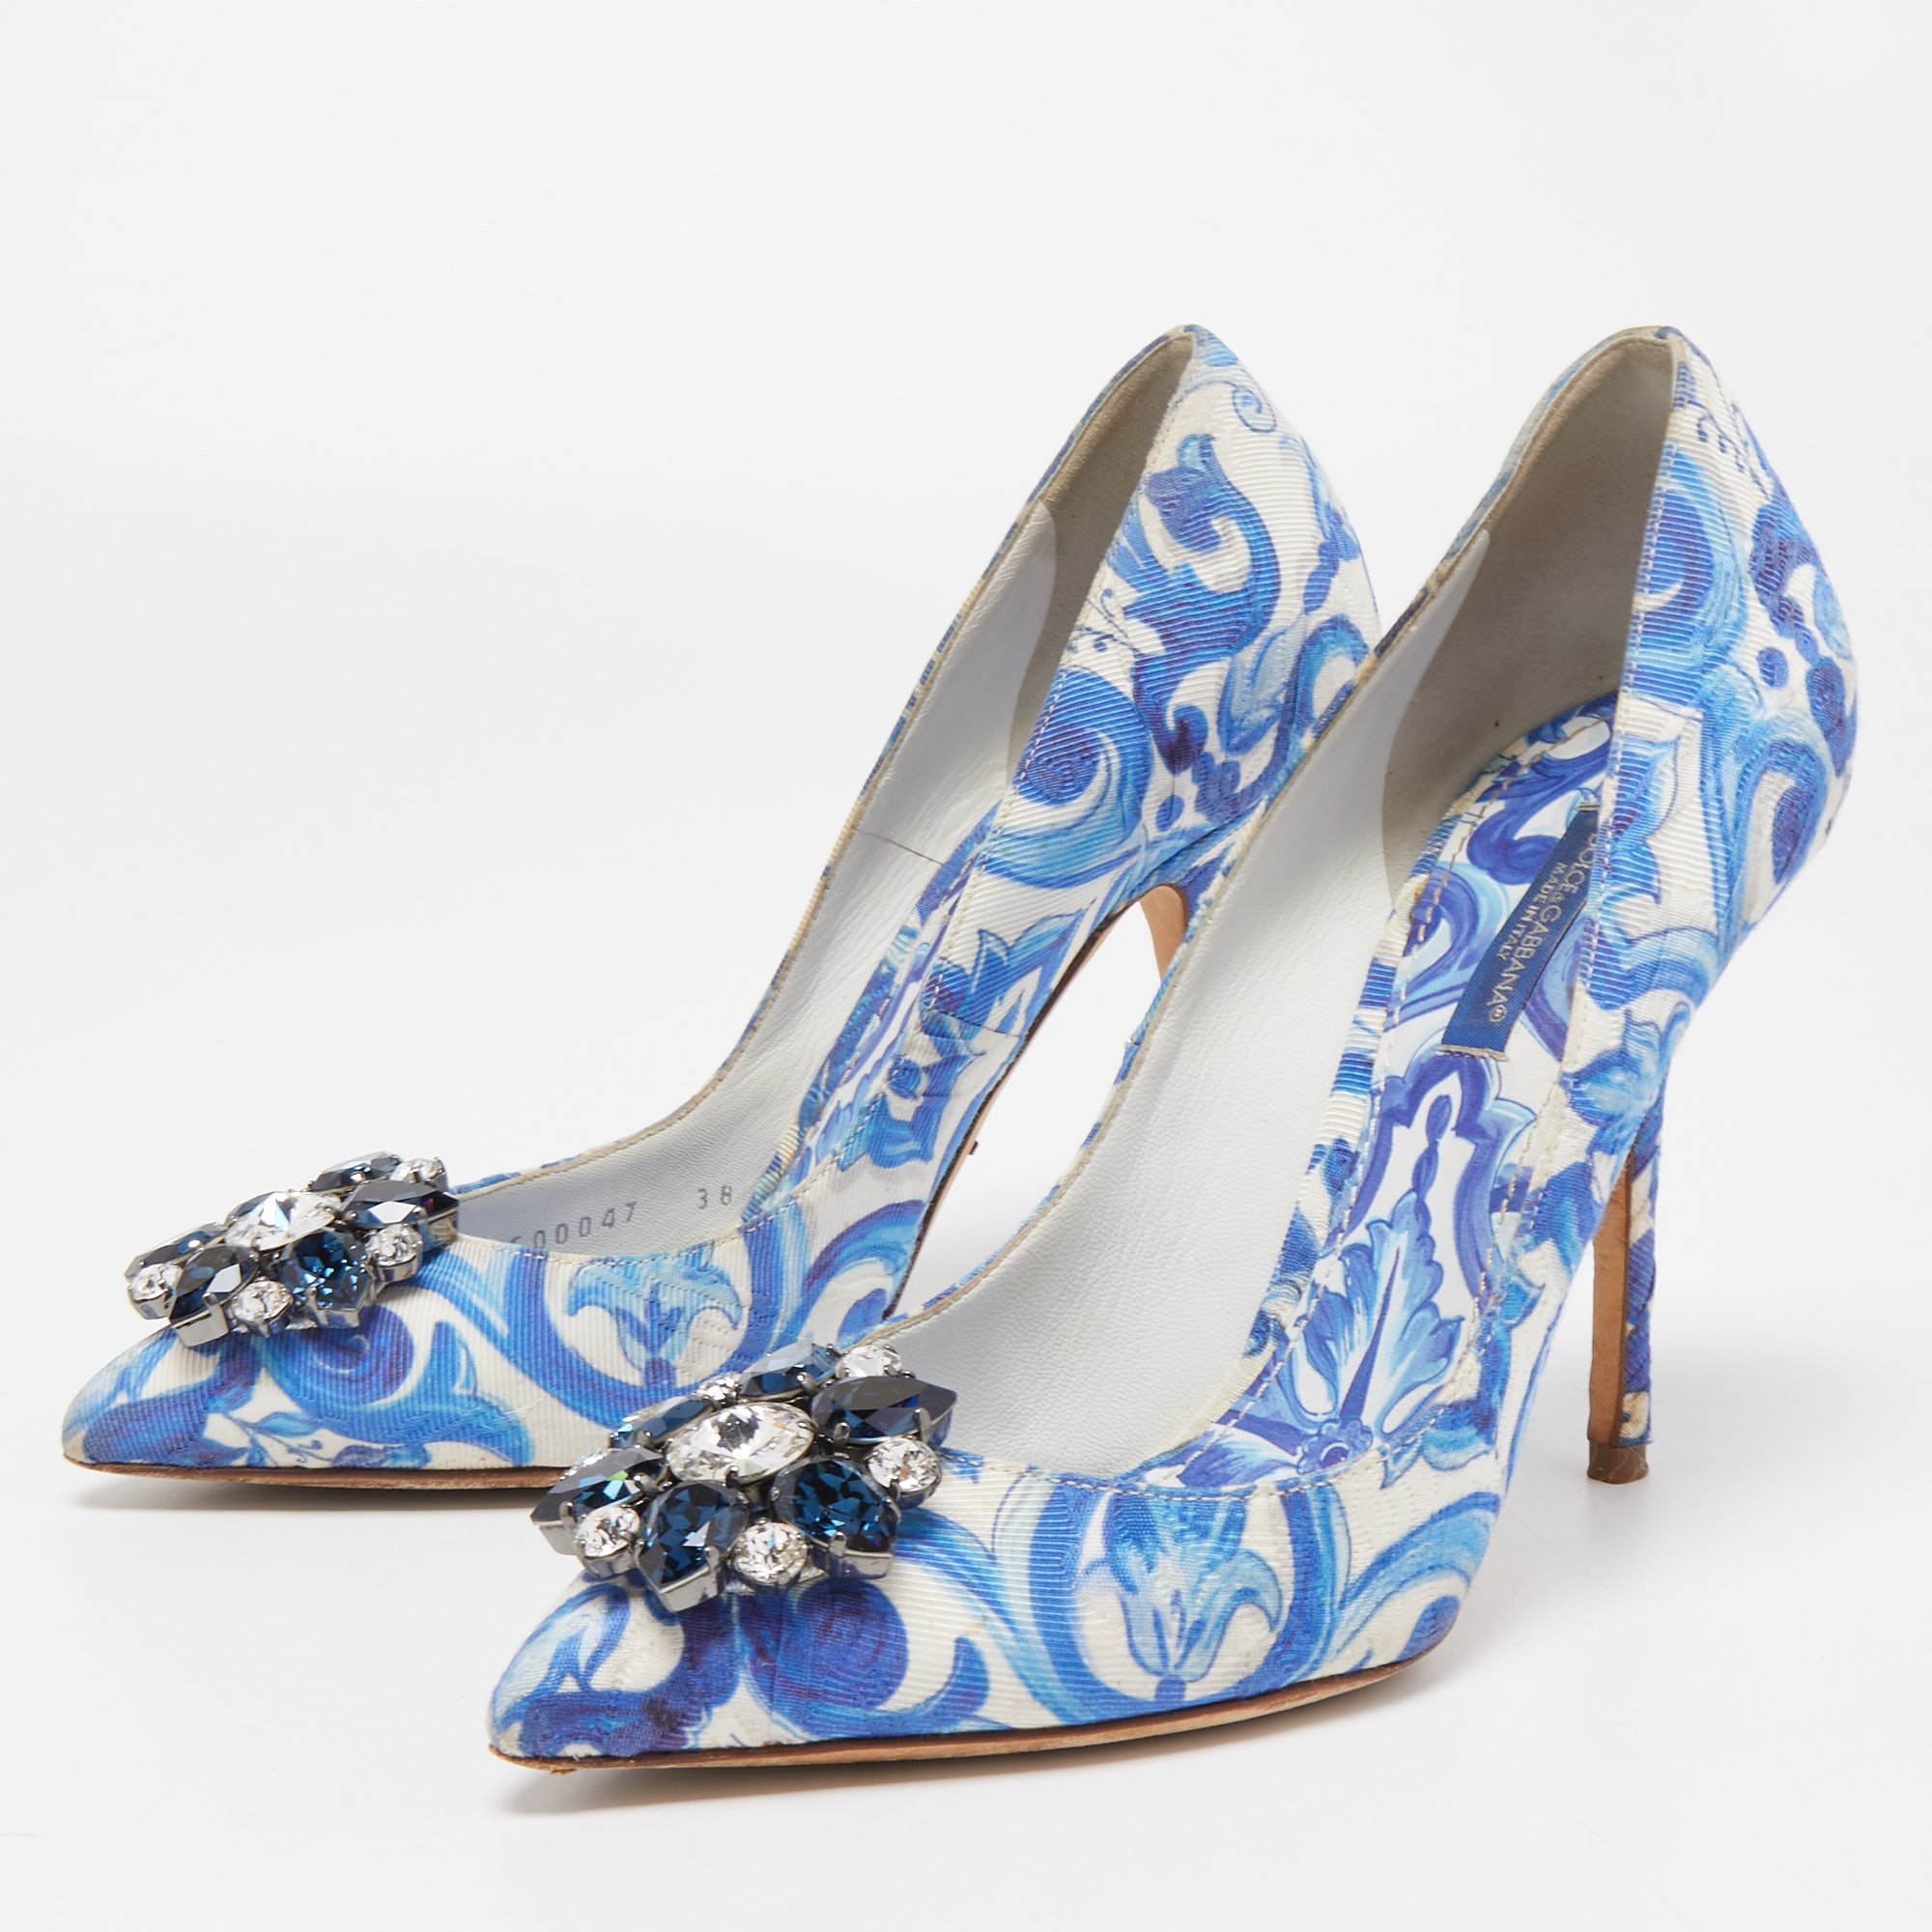 

Dolce & Gabbana Blue Print Brocade Fabric Bellucci Crystal Embellished Pointed Toe Pumps Size